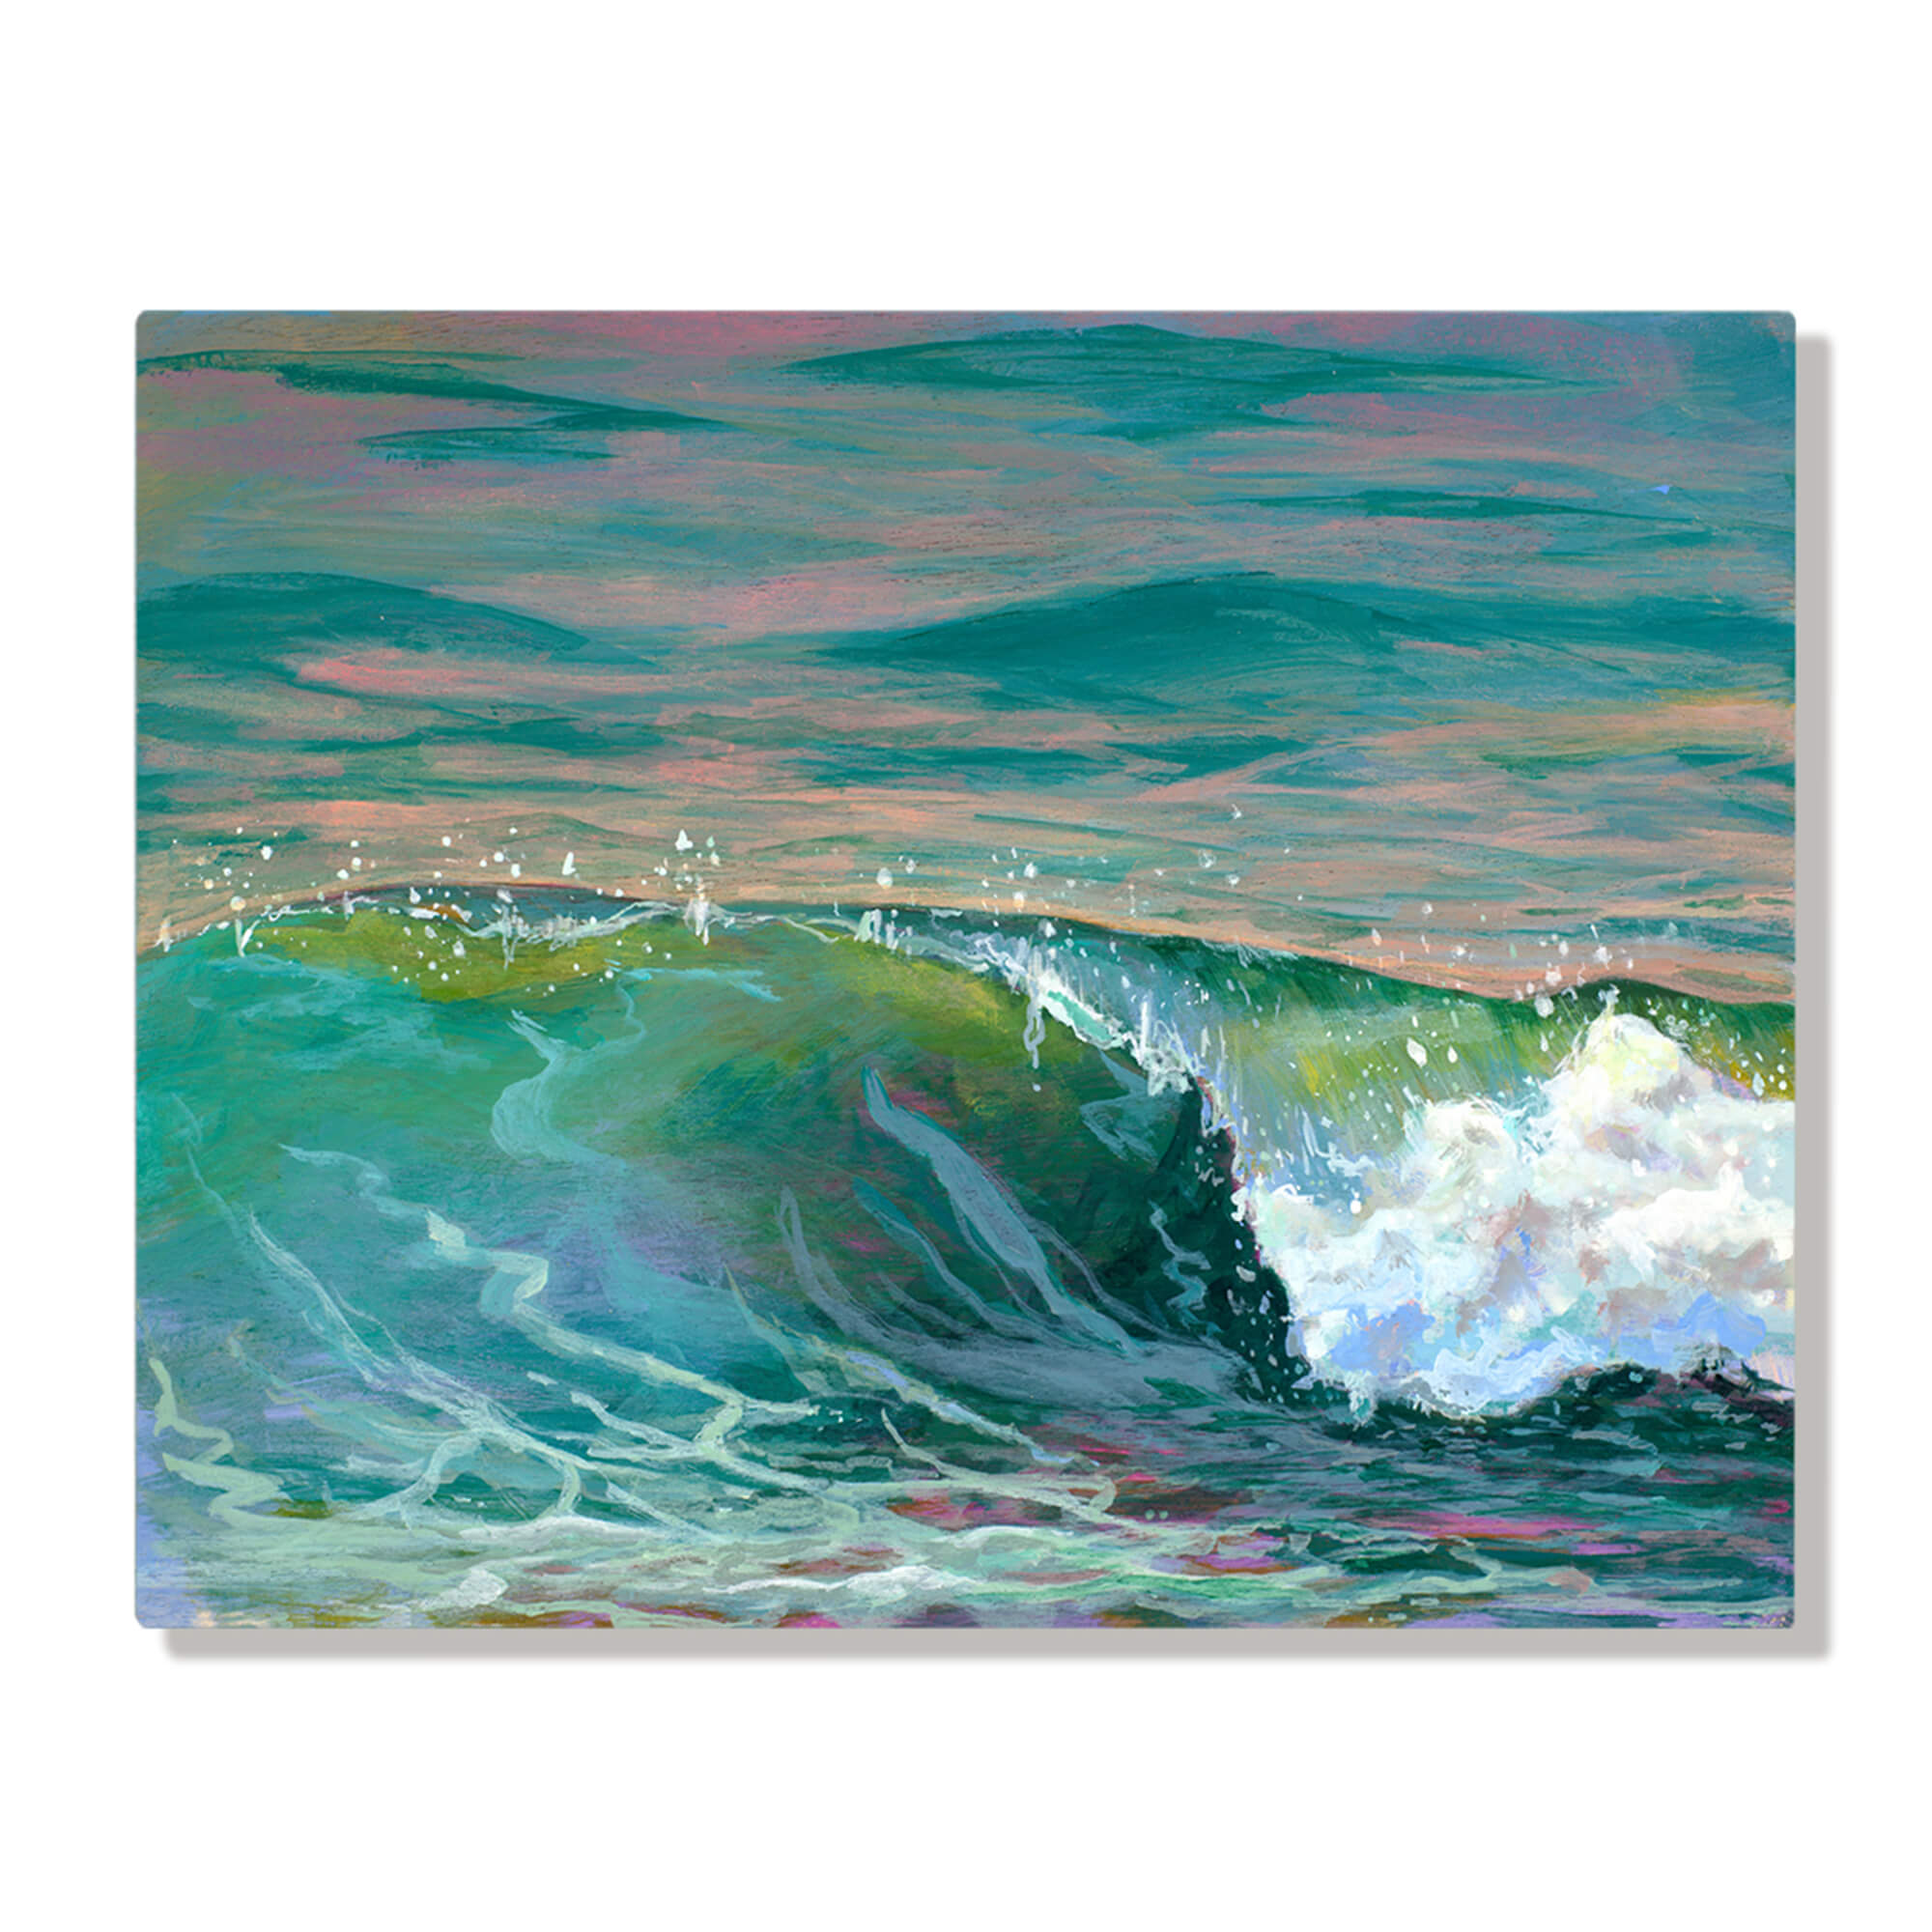 A wave with different shades of green by Hawaii artist Lindsay Wilkins